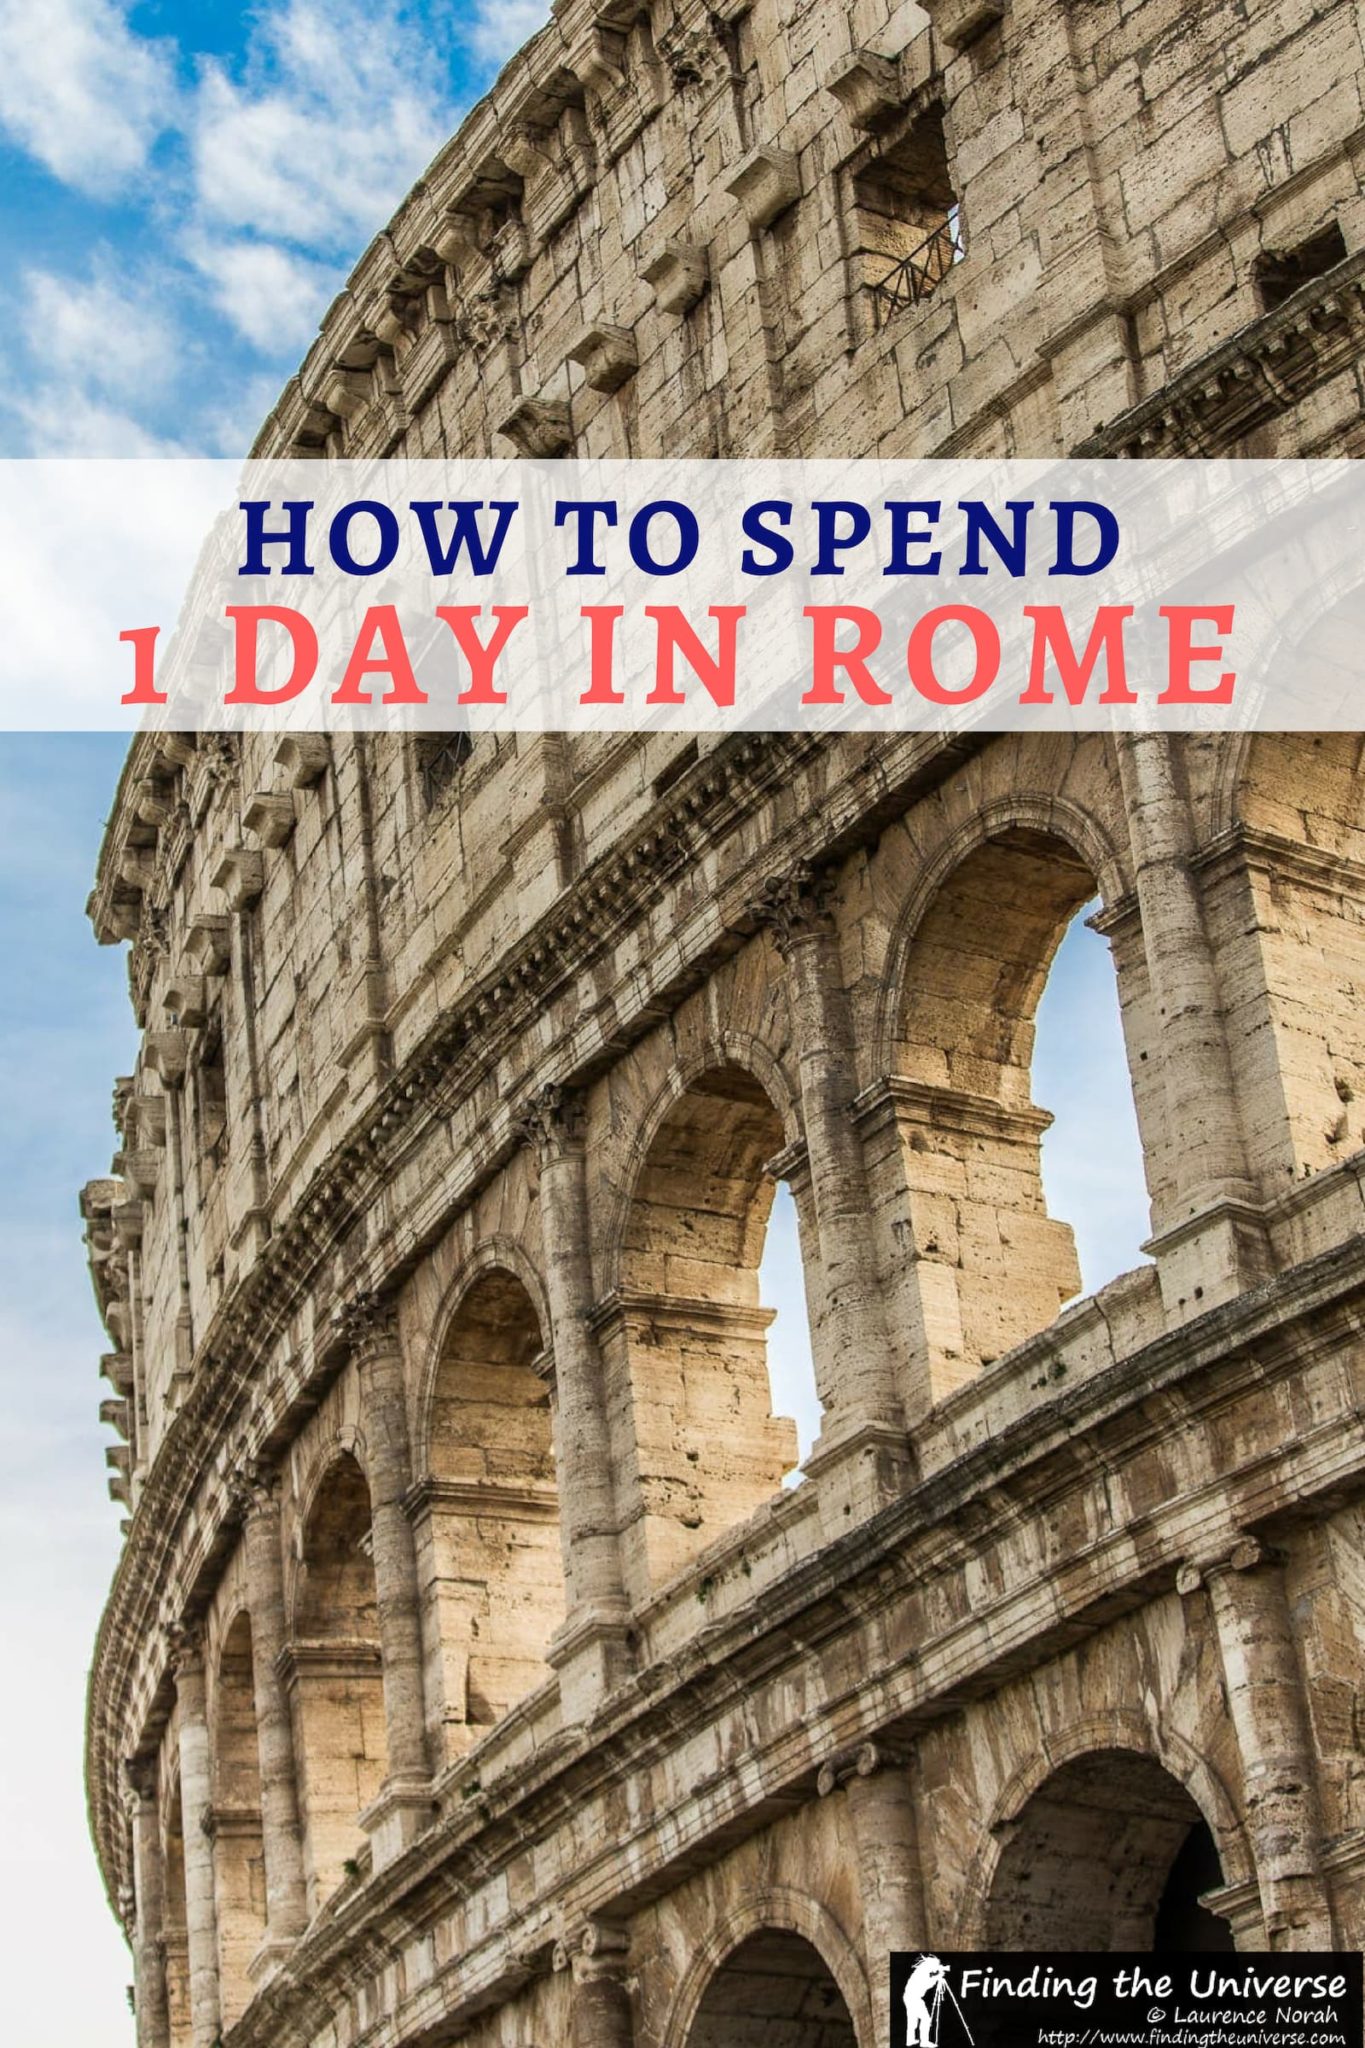 1 day tour in rome